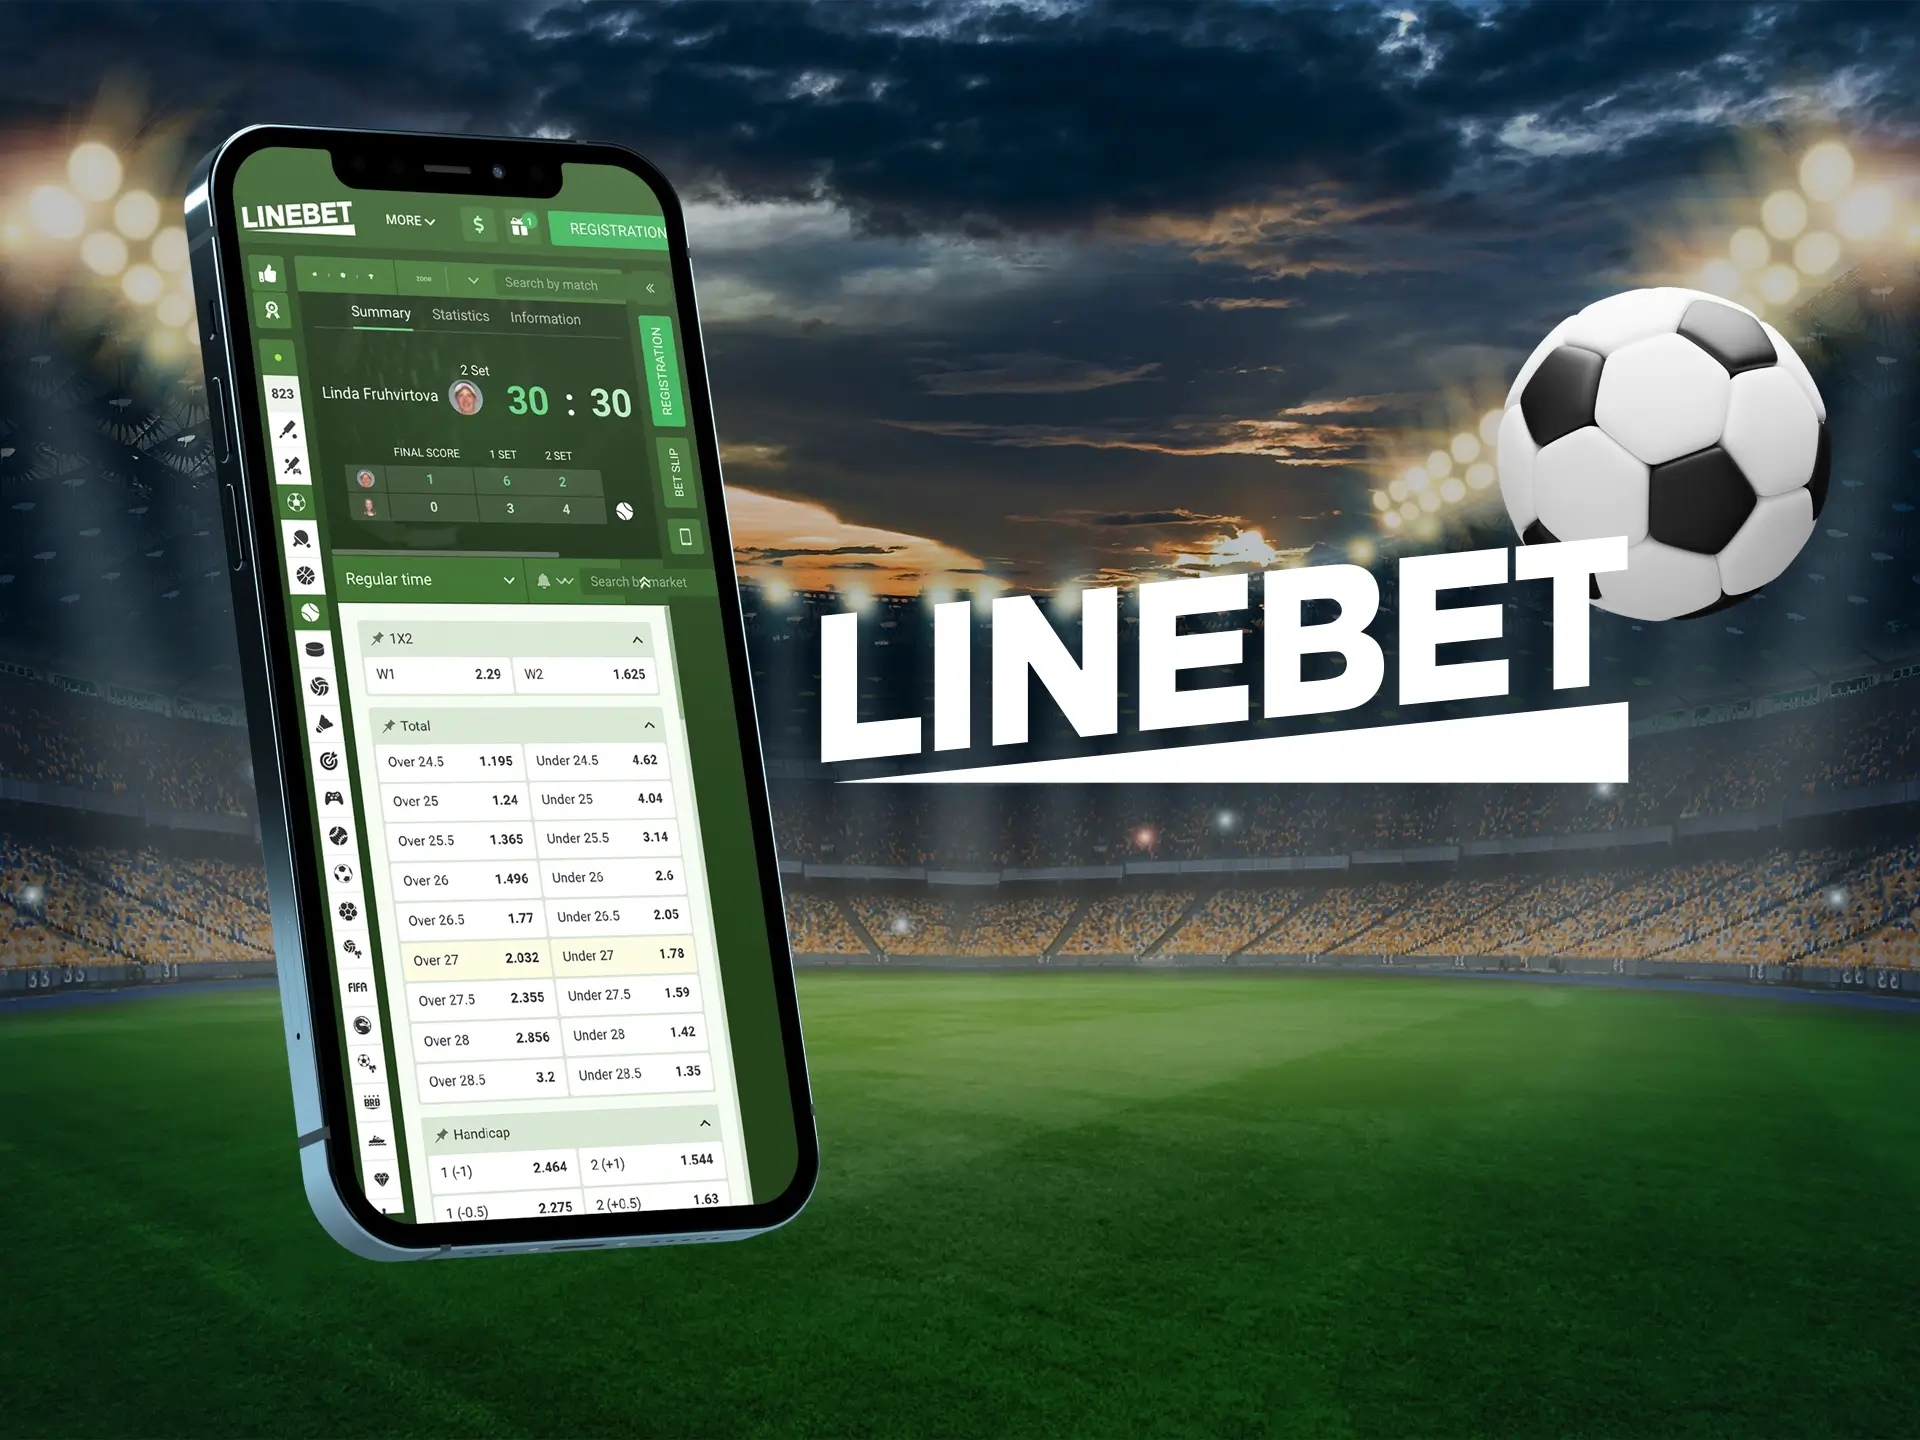 Get your welcome bonus from Linebet and go for the wins.